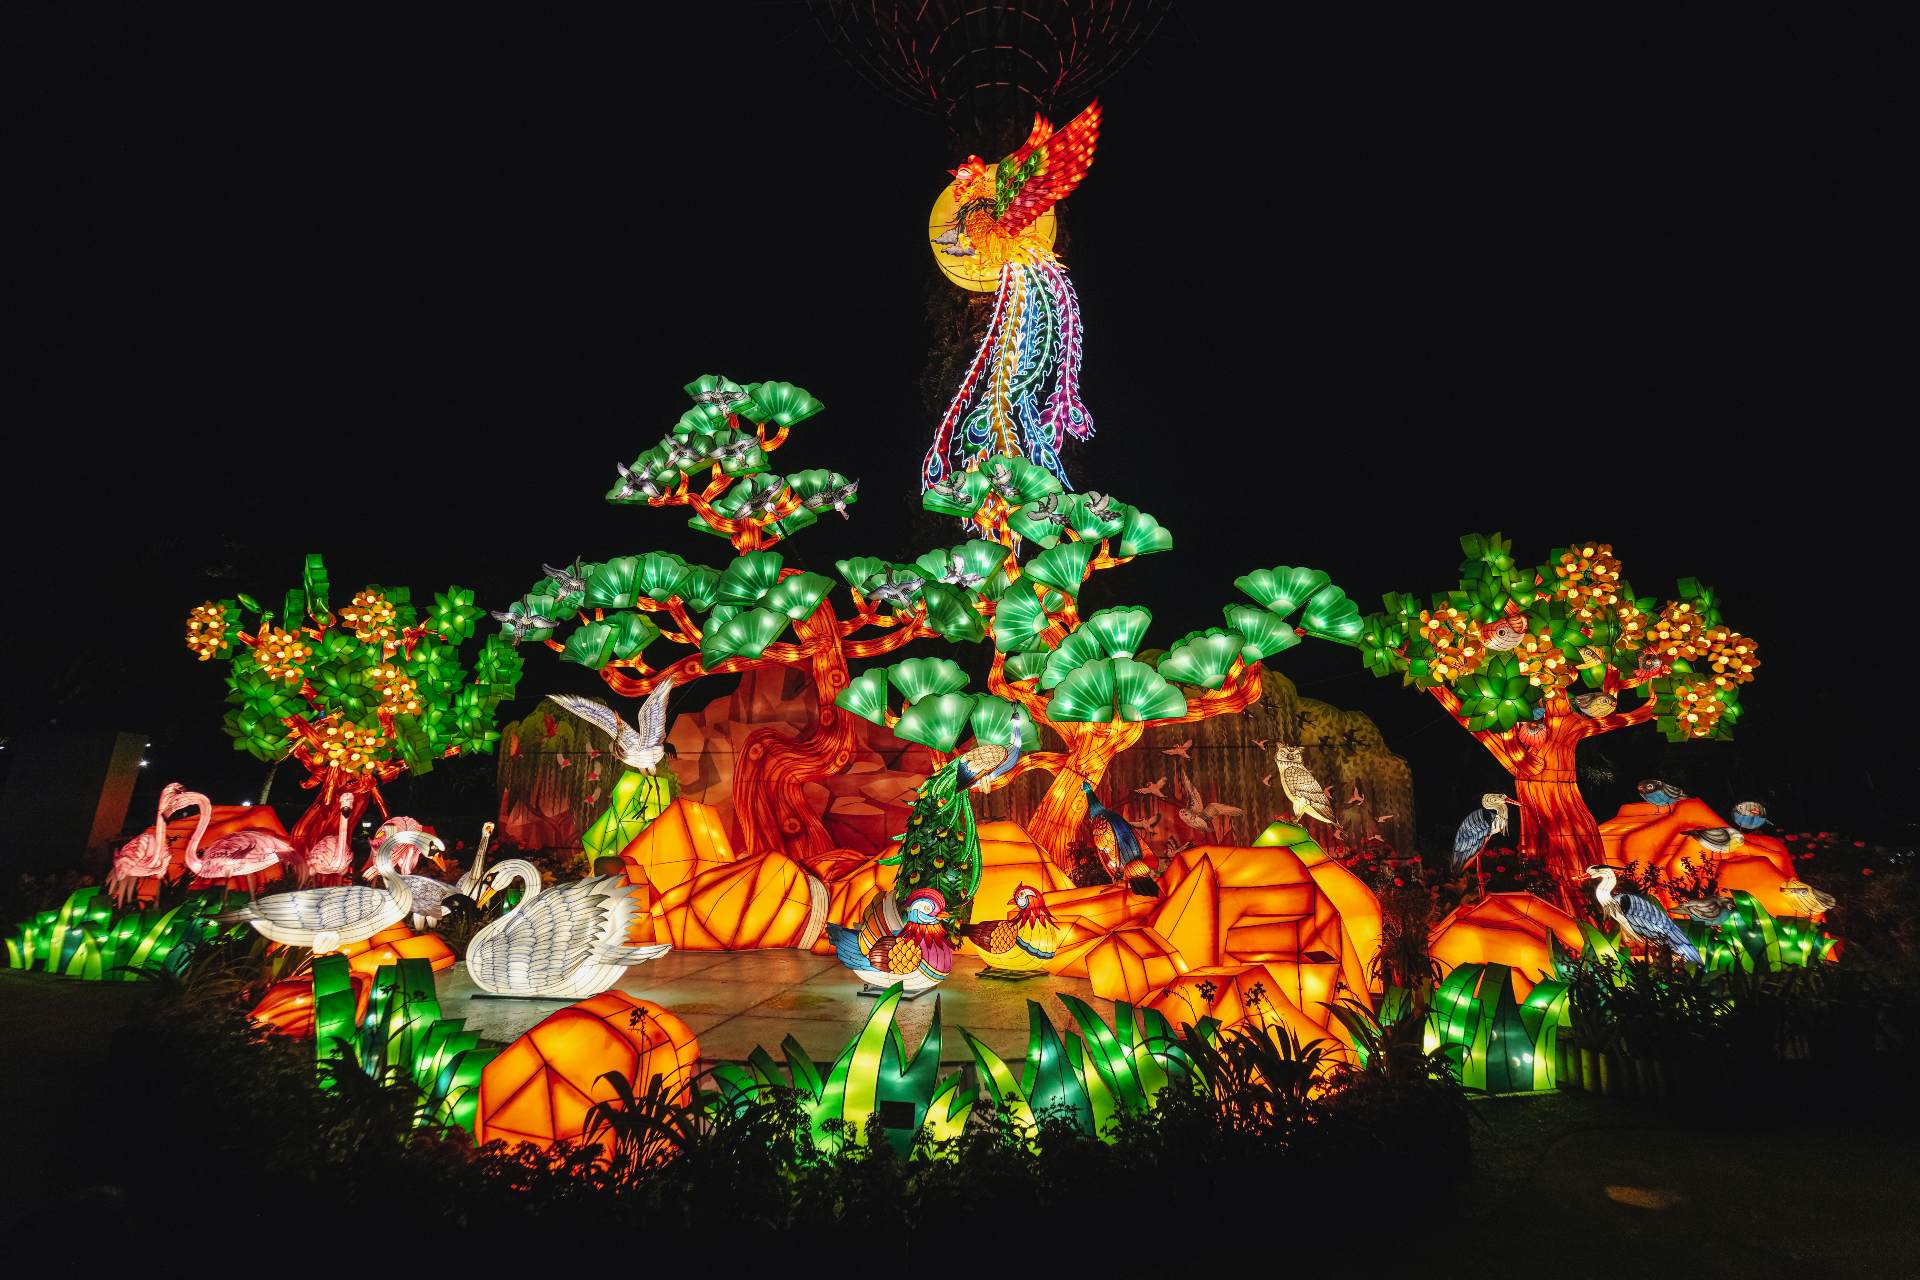 Lanterns, Road Meals, And Mid-Autumn Actions Galore At Gardens By The Bay